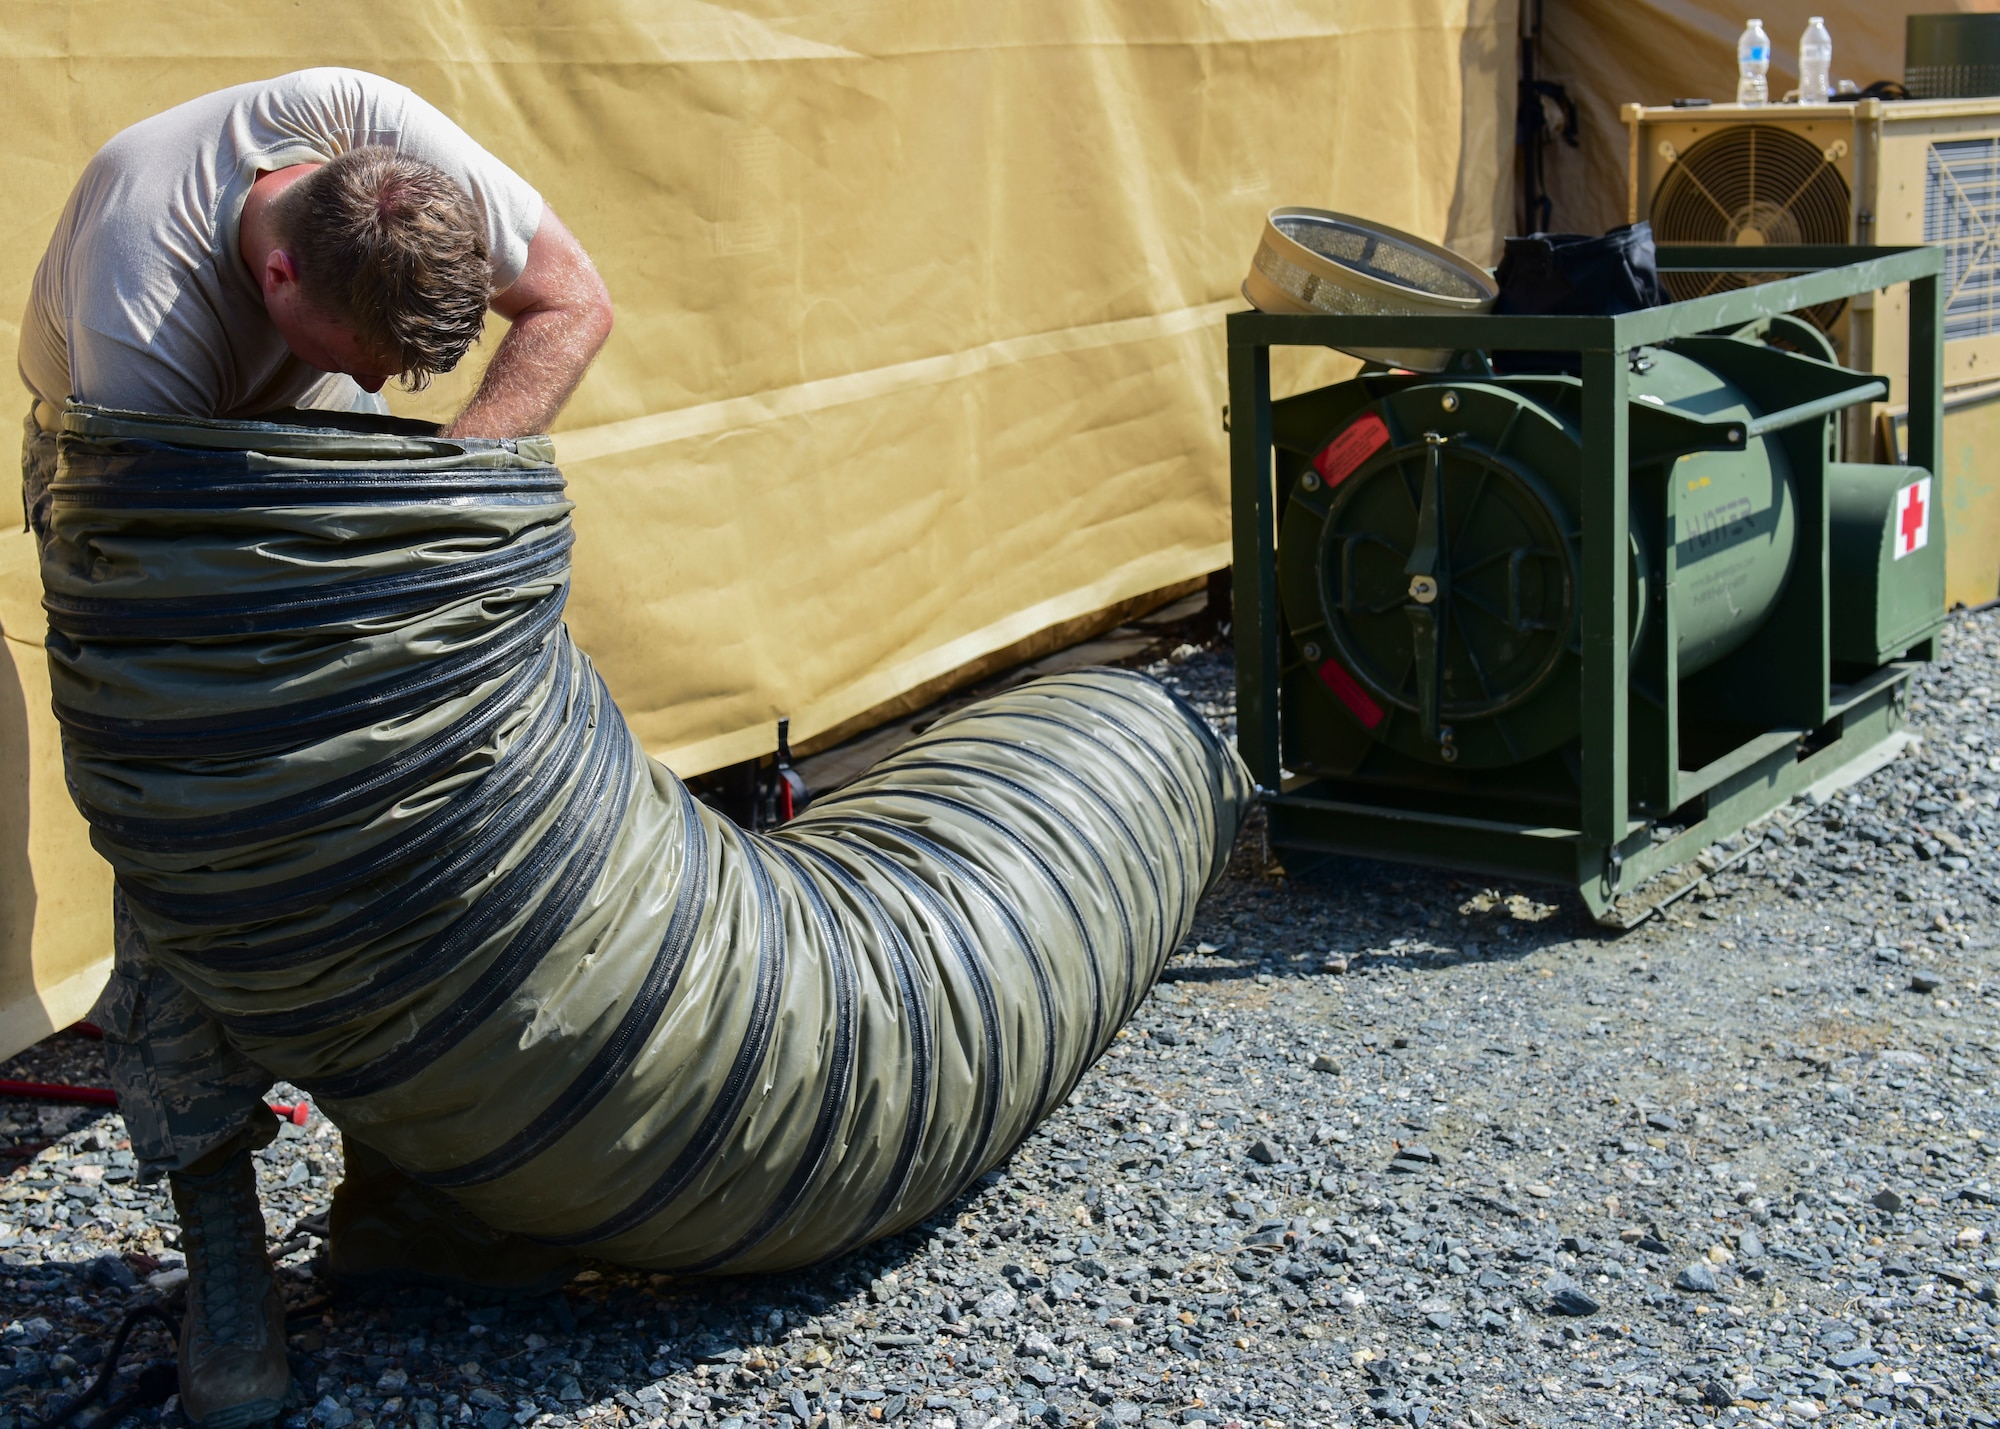 An Expeditionary Medical Systems exercise Airman assembles tent components at Joint Base Langley-Eustis, Va., June 20, 2018. A core group of Airmen were trained on tent assembly prior to the exercise and were then tasked with teaching exercise volunteers on the newly learned procedures. (U.S. Air Force photo by Airman 1st Class Monica Roybal)